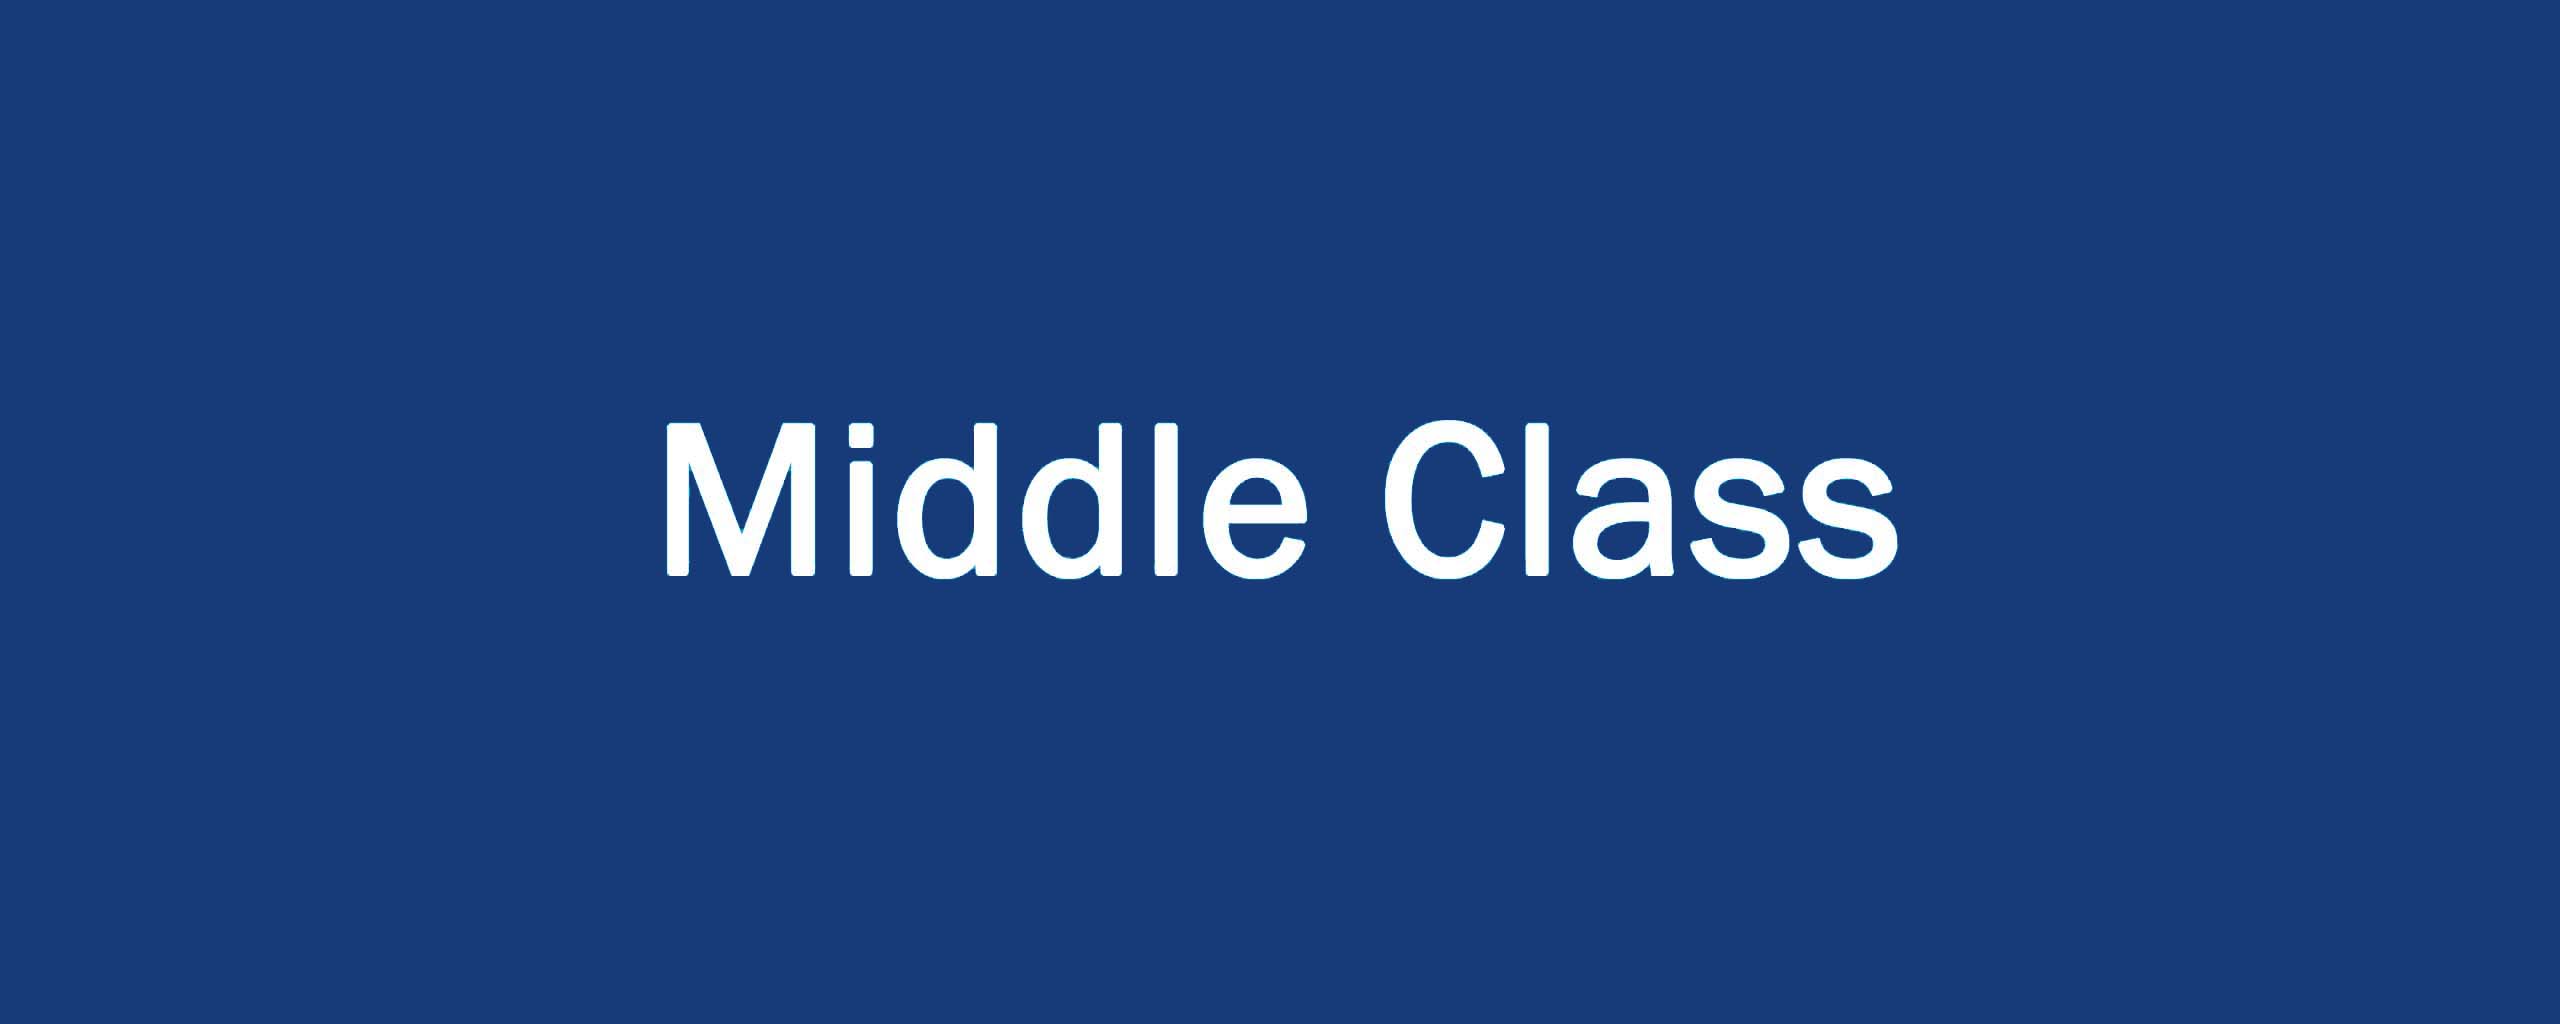 Middle Class 